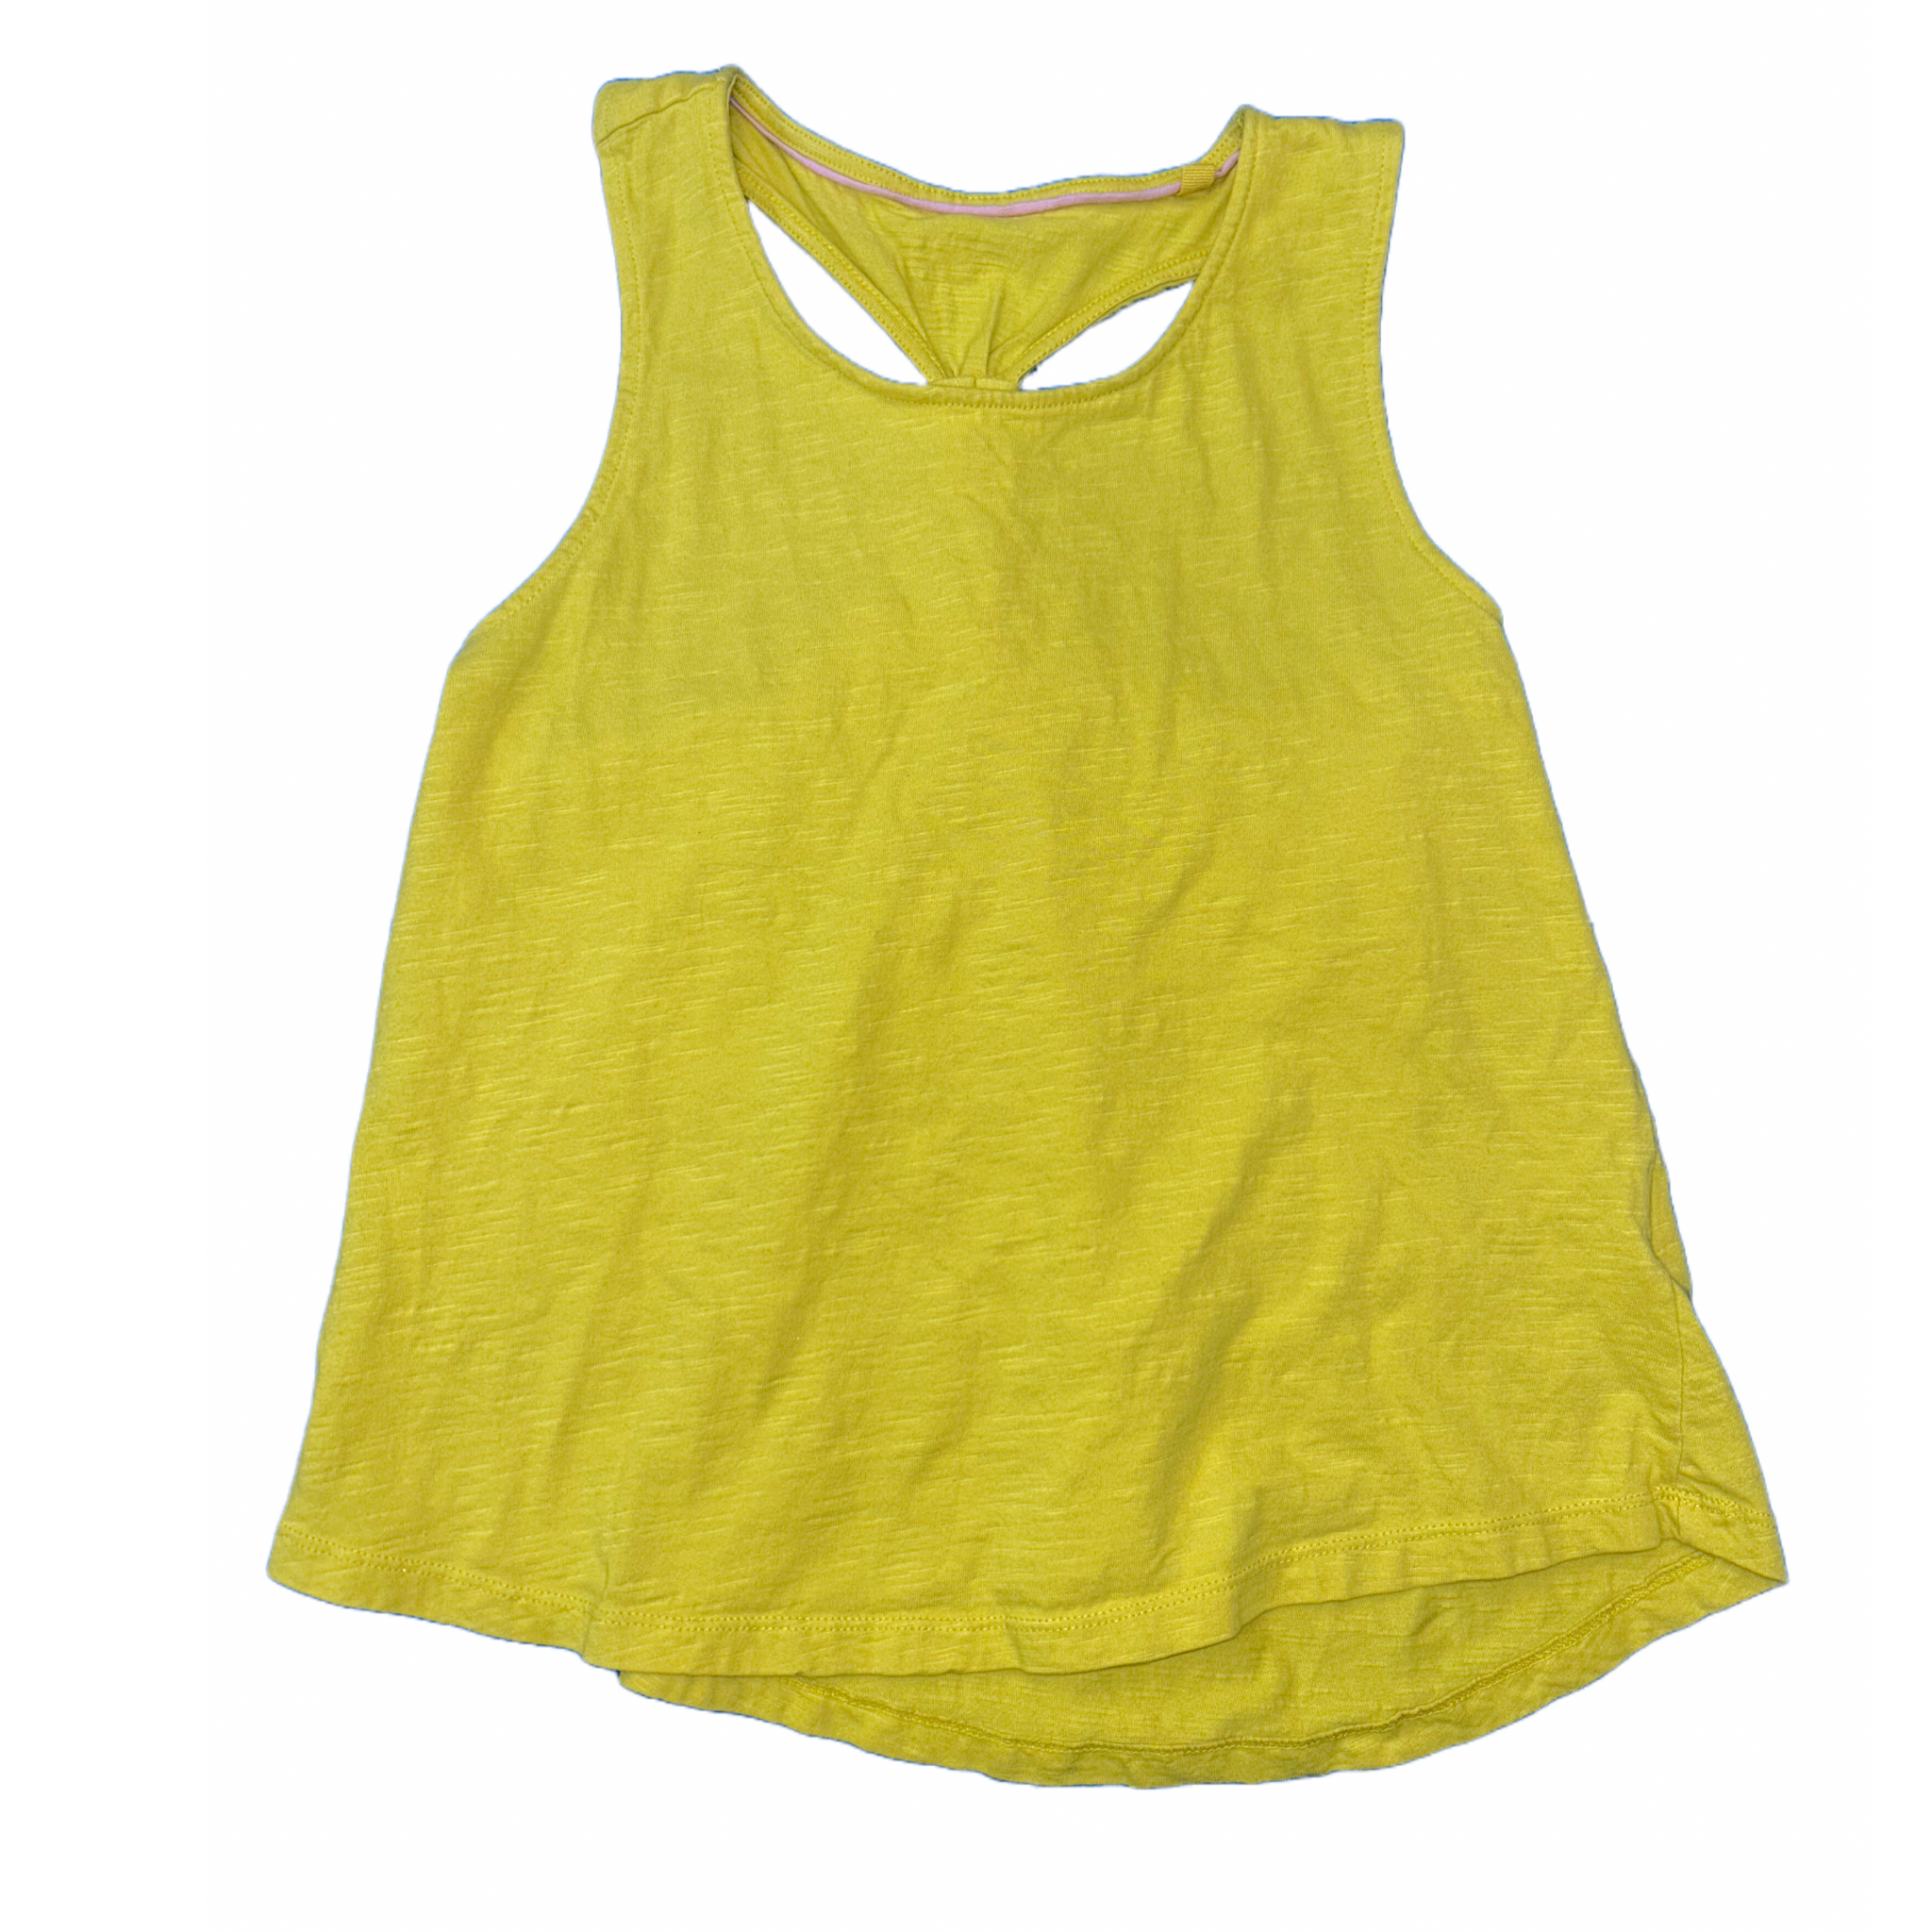 Tank top by Boden size 11-12